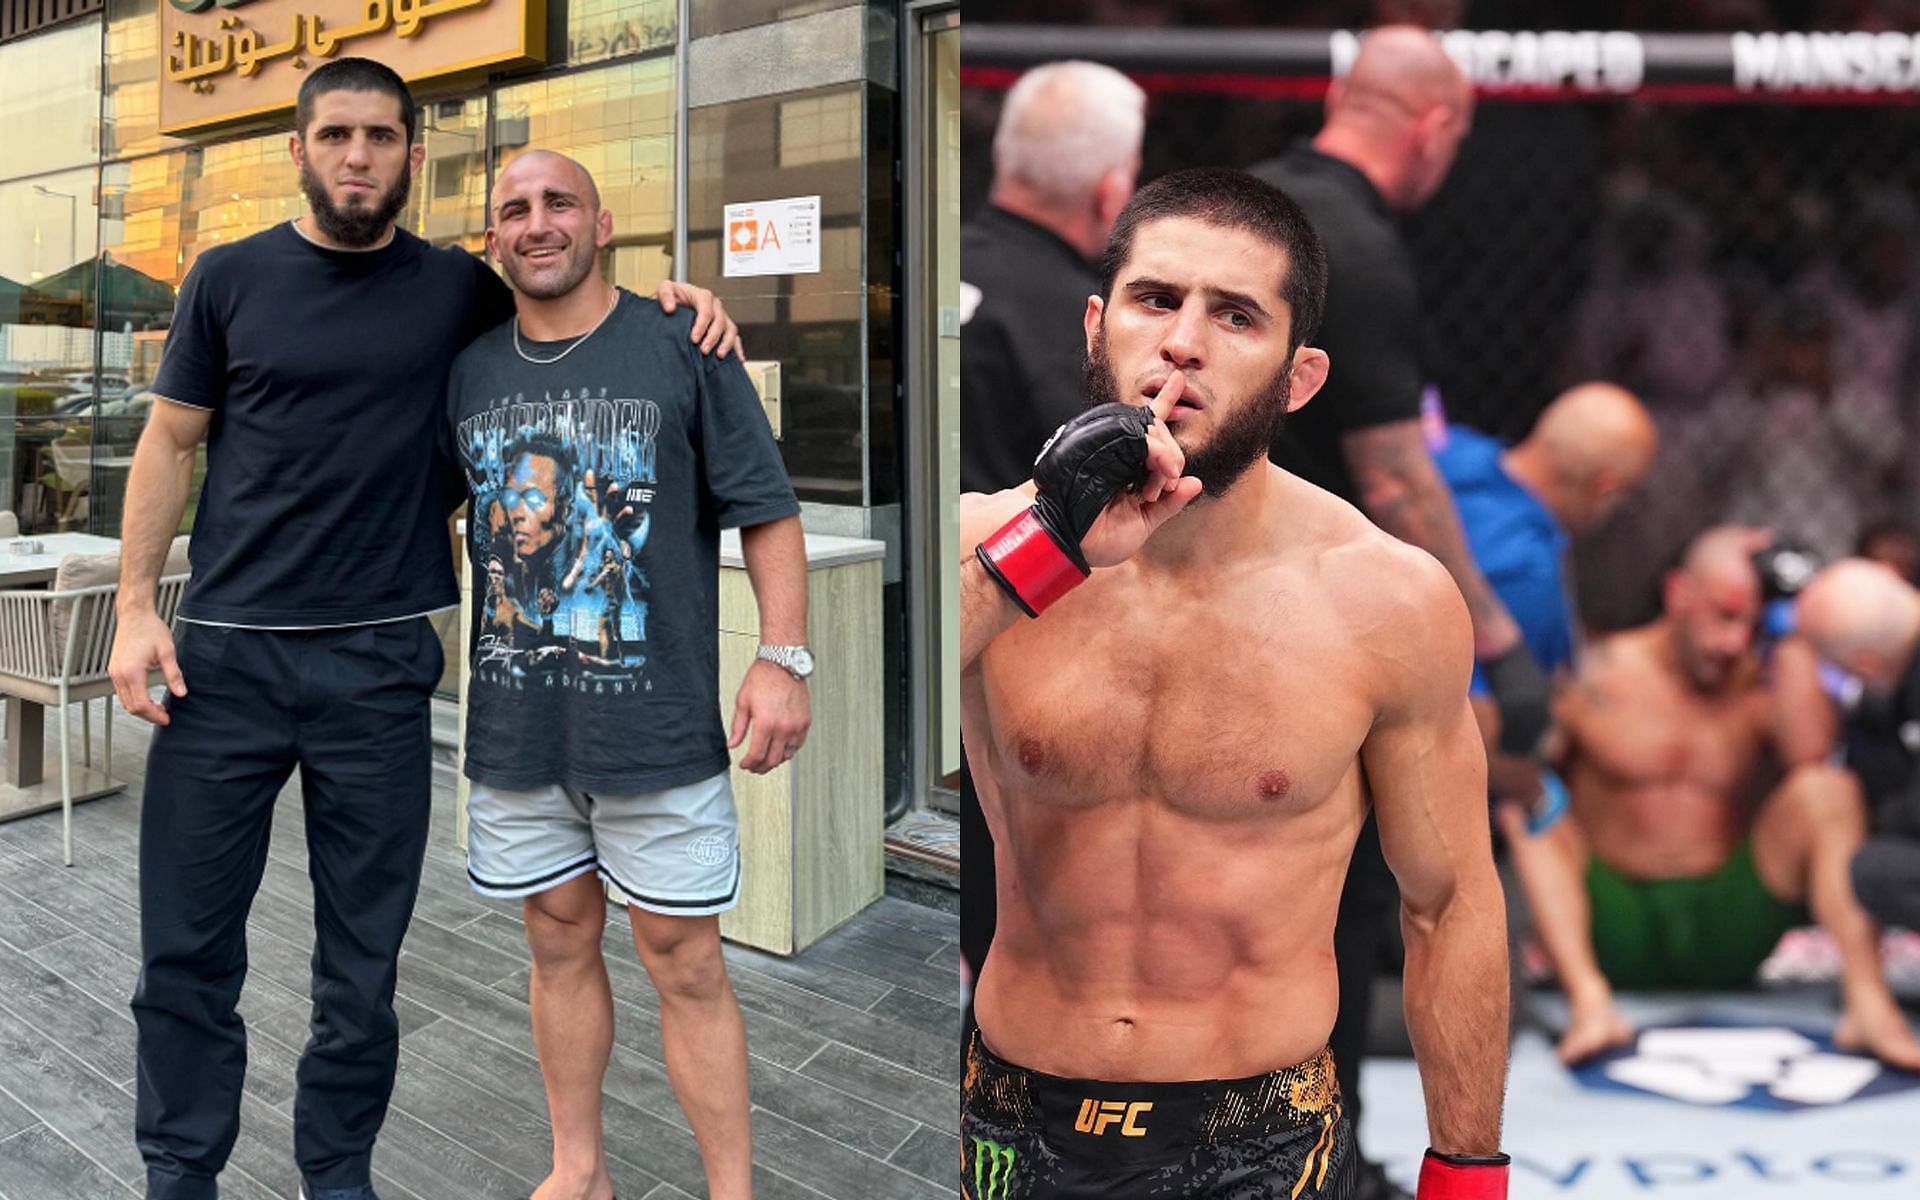 Alexander Volkanovski and Islam Makhachev now (left) and immediately after the fight ended (right) (Images via @alexvolkanovski and @ufc Instagram)